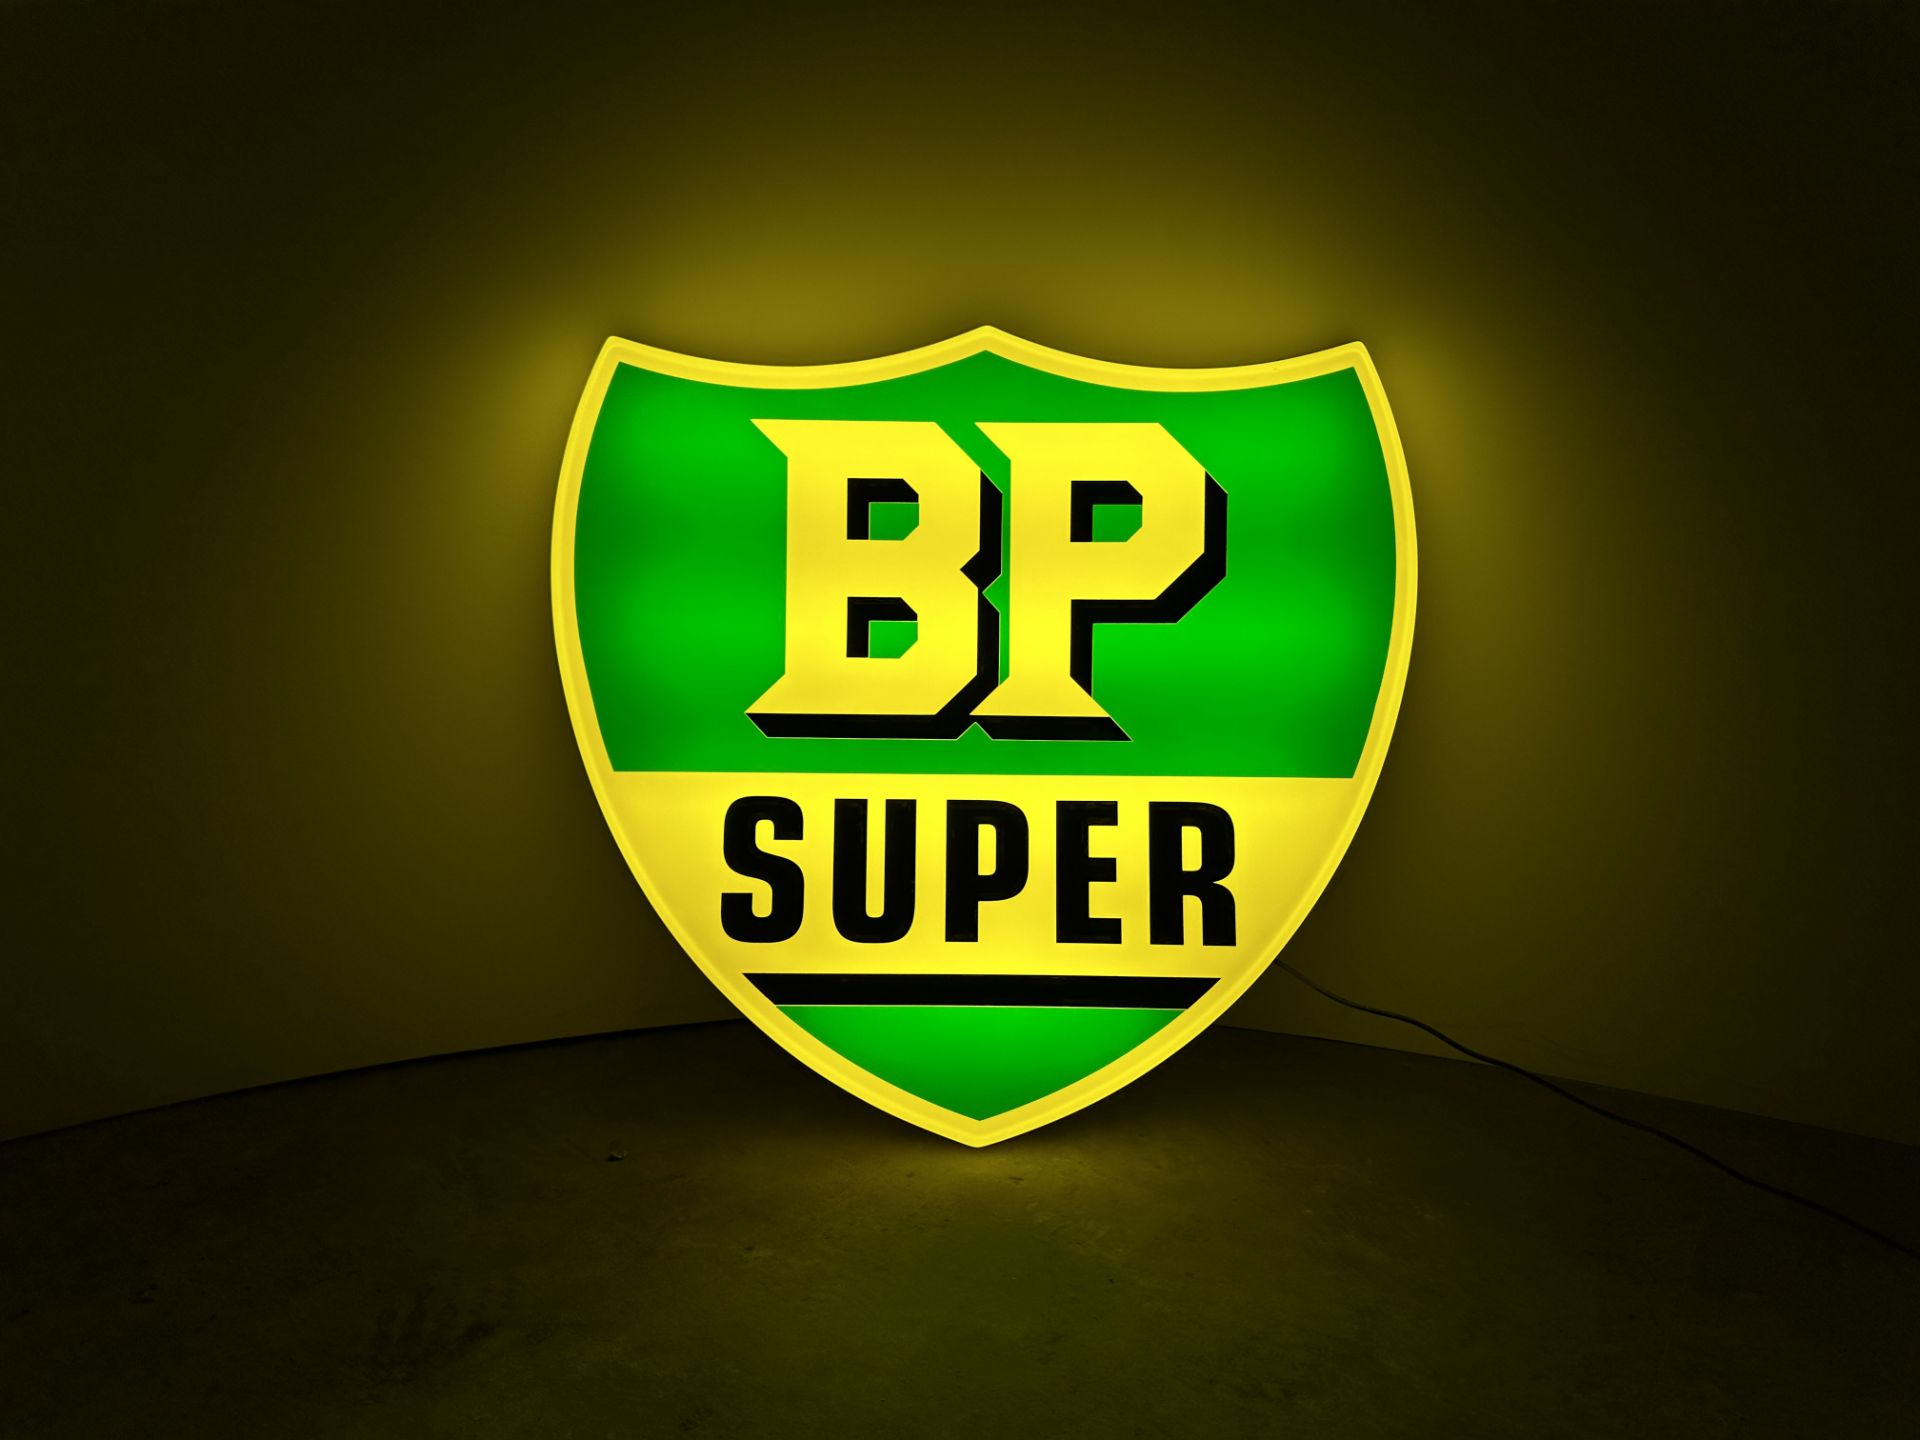 BP illumination sign in any country